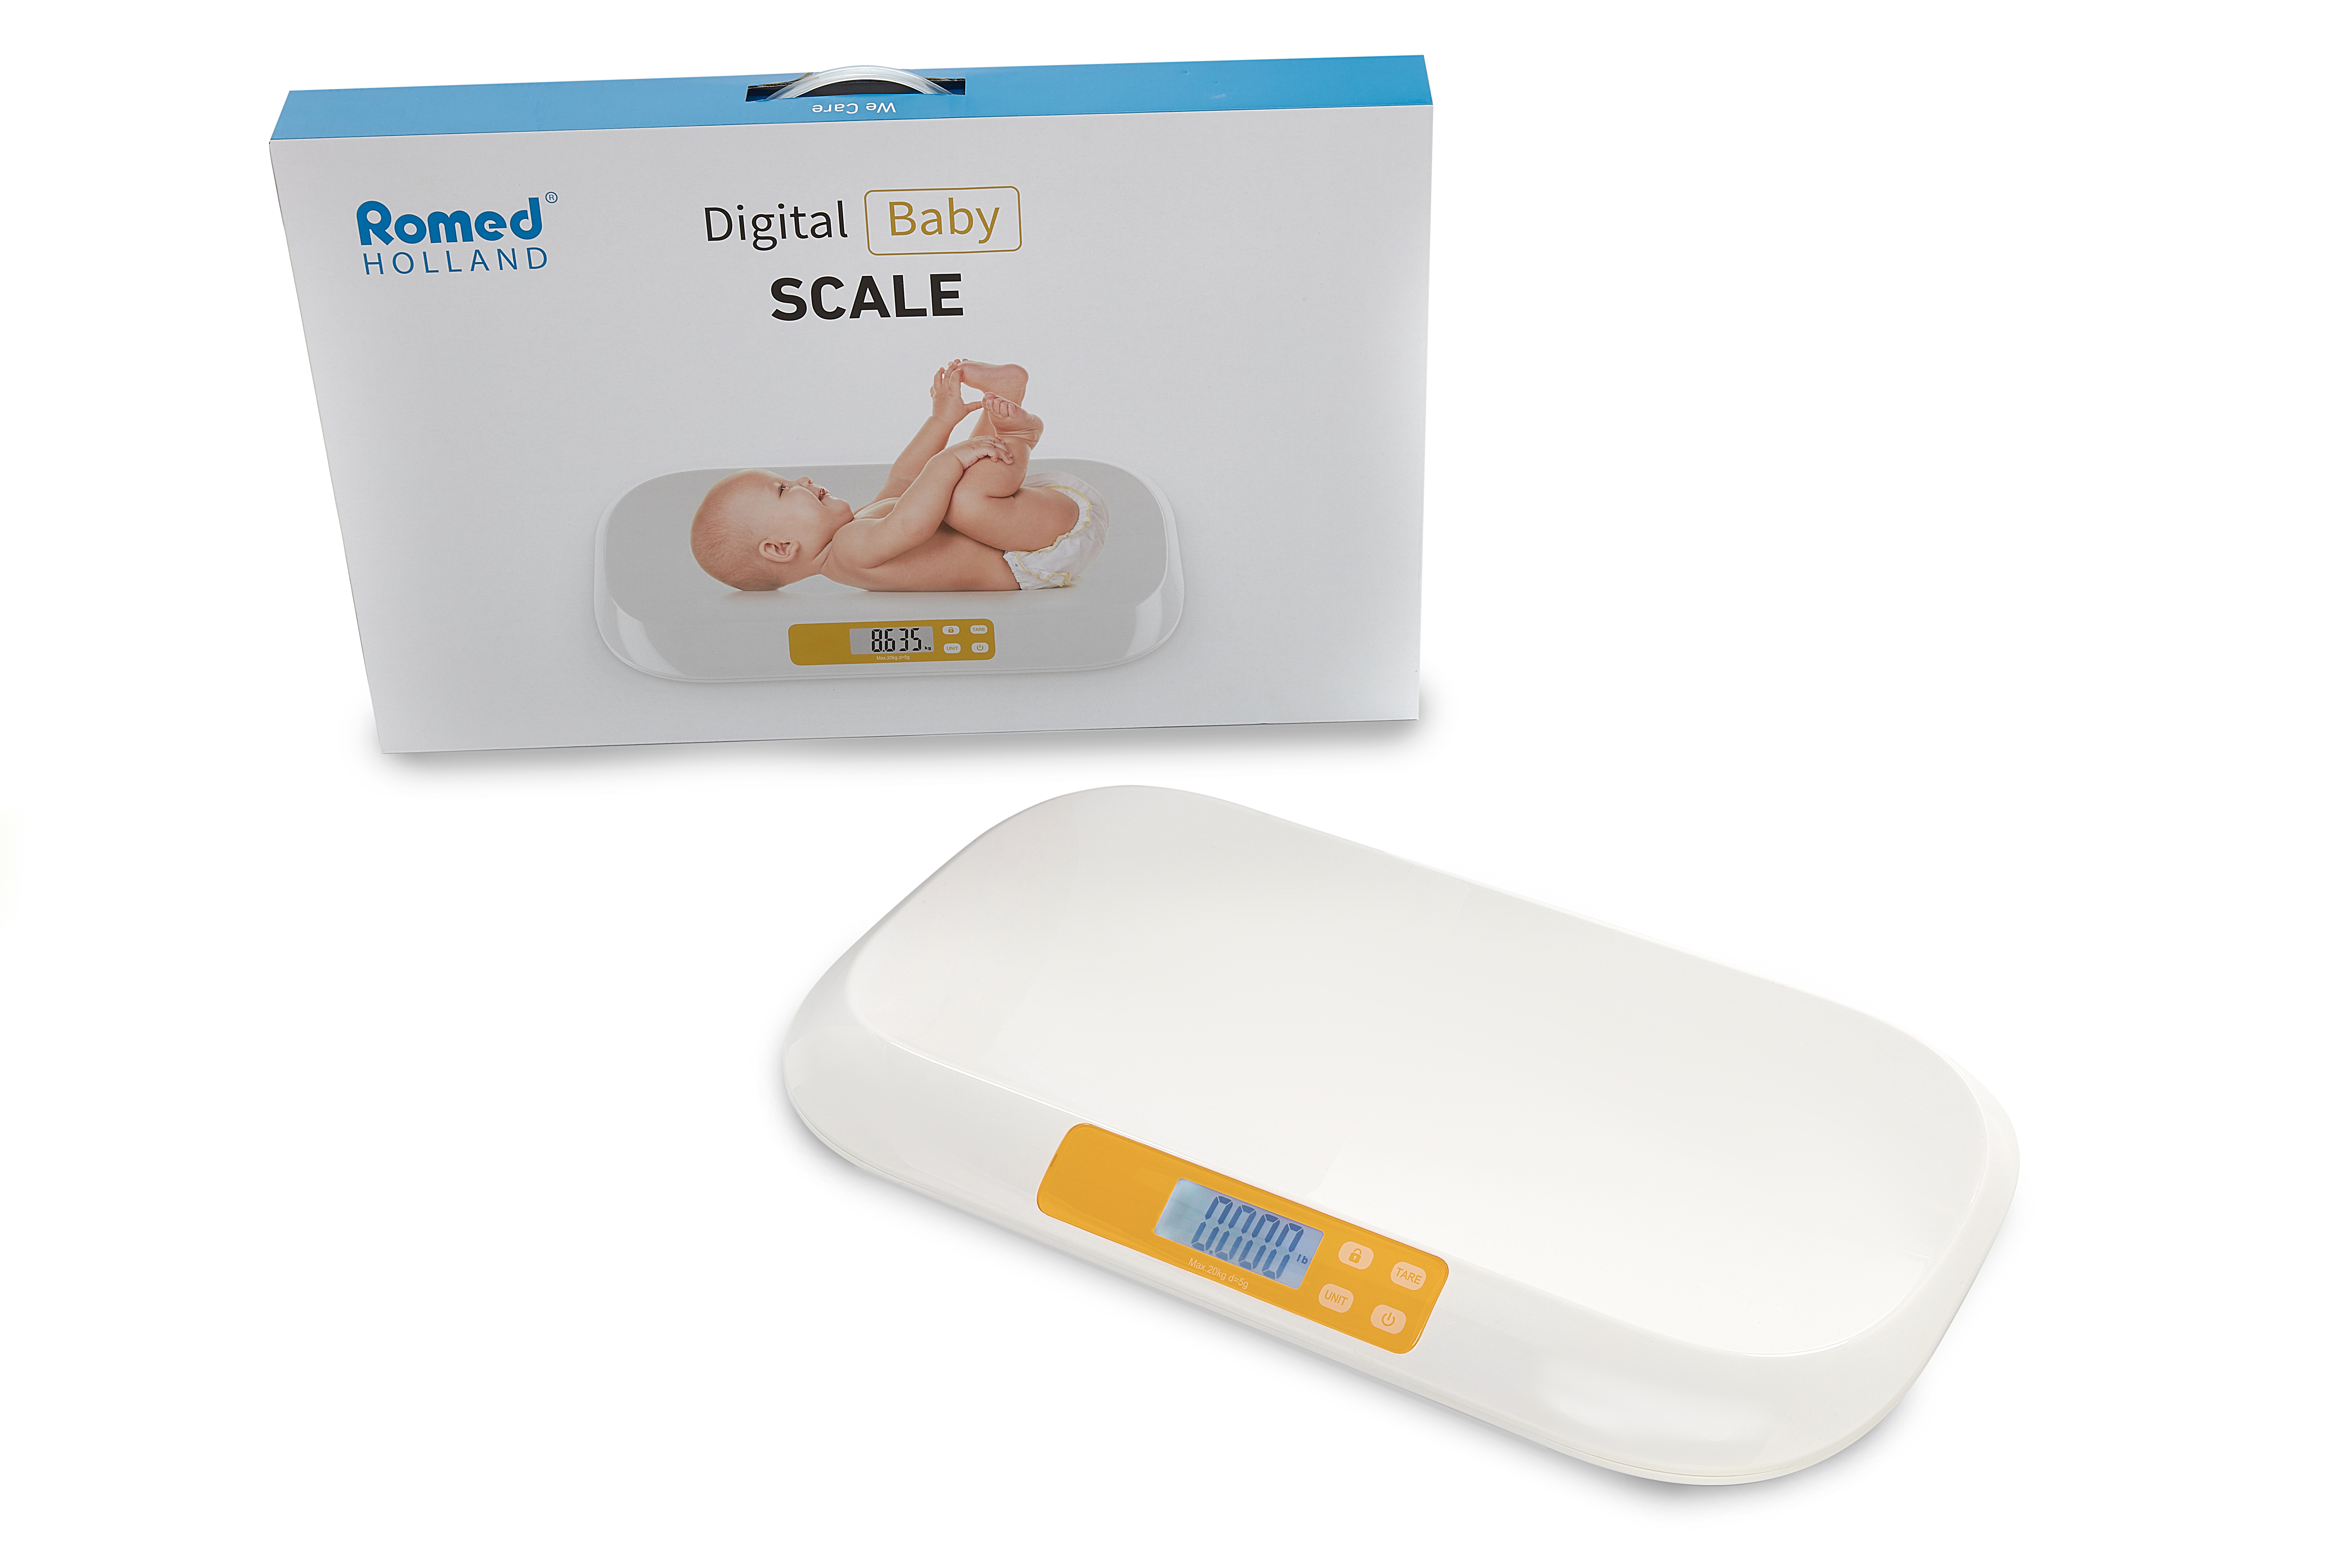 BS003 Romed baby scales, digital type, packed per piece in an inner box, 4 pcs in a carton.